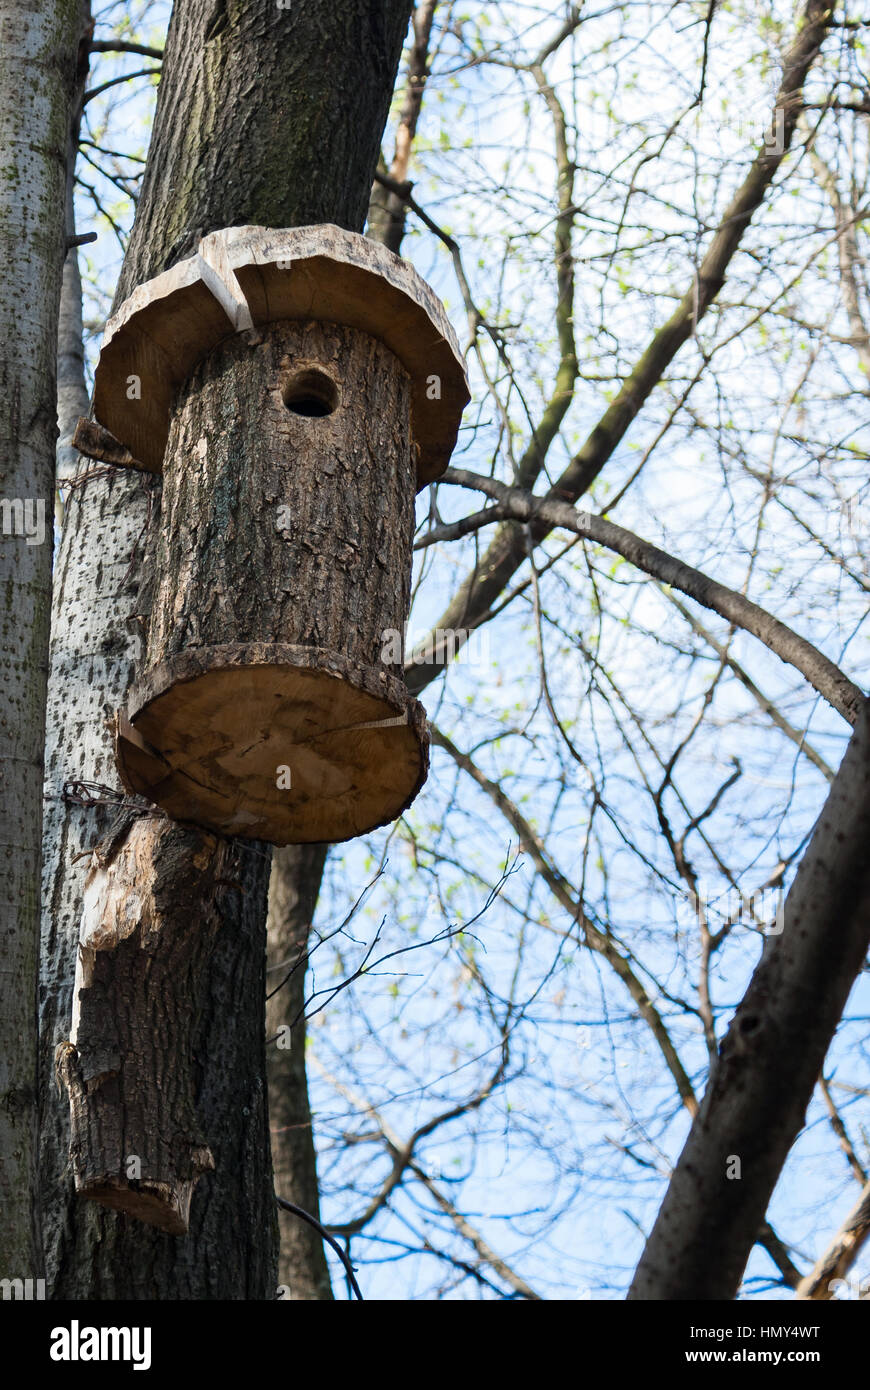 Wooden birdhouse made with your own hands mounted on wood Stock Photo